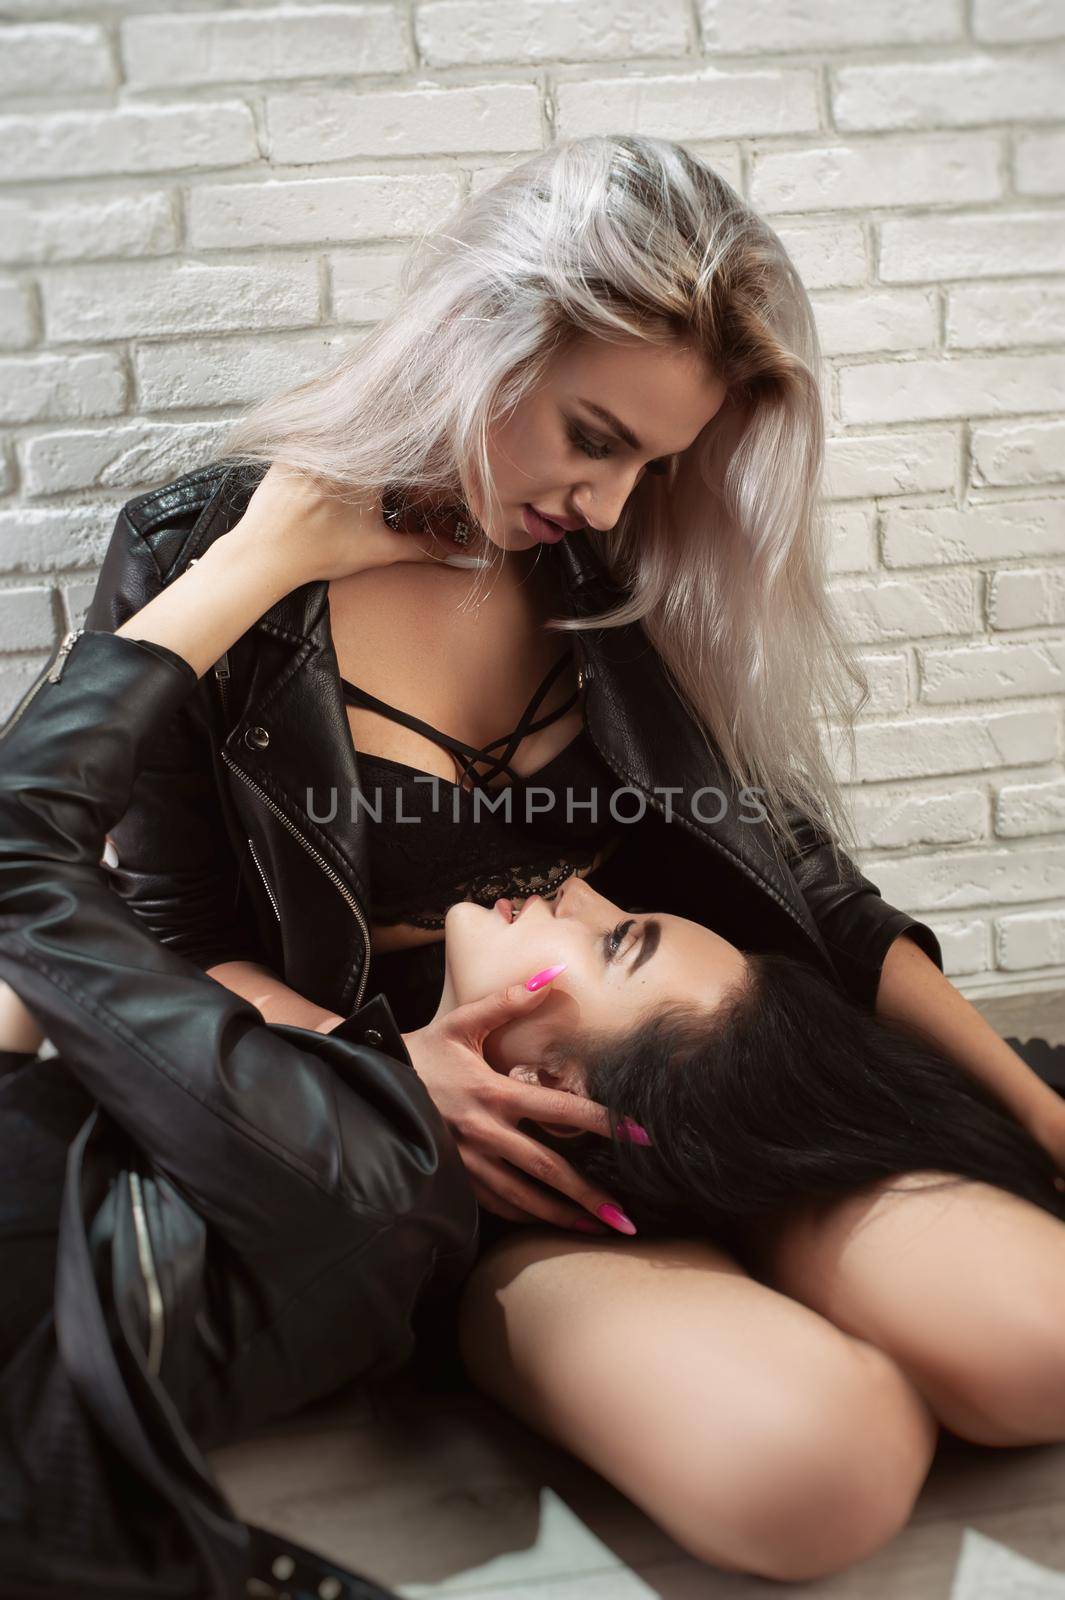 two young lesbians lustful women in leather jackets embrace against a white brick wall showing intimacy and flirtation by Rotozey